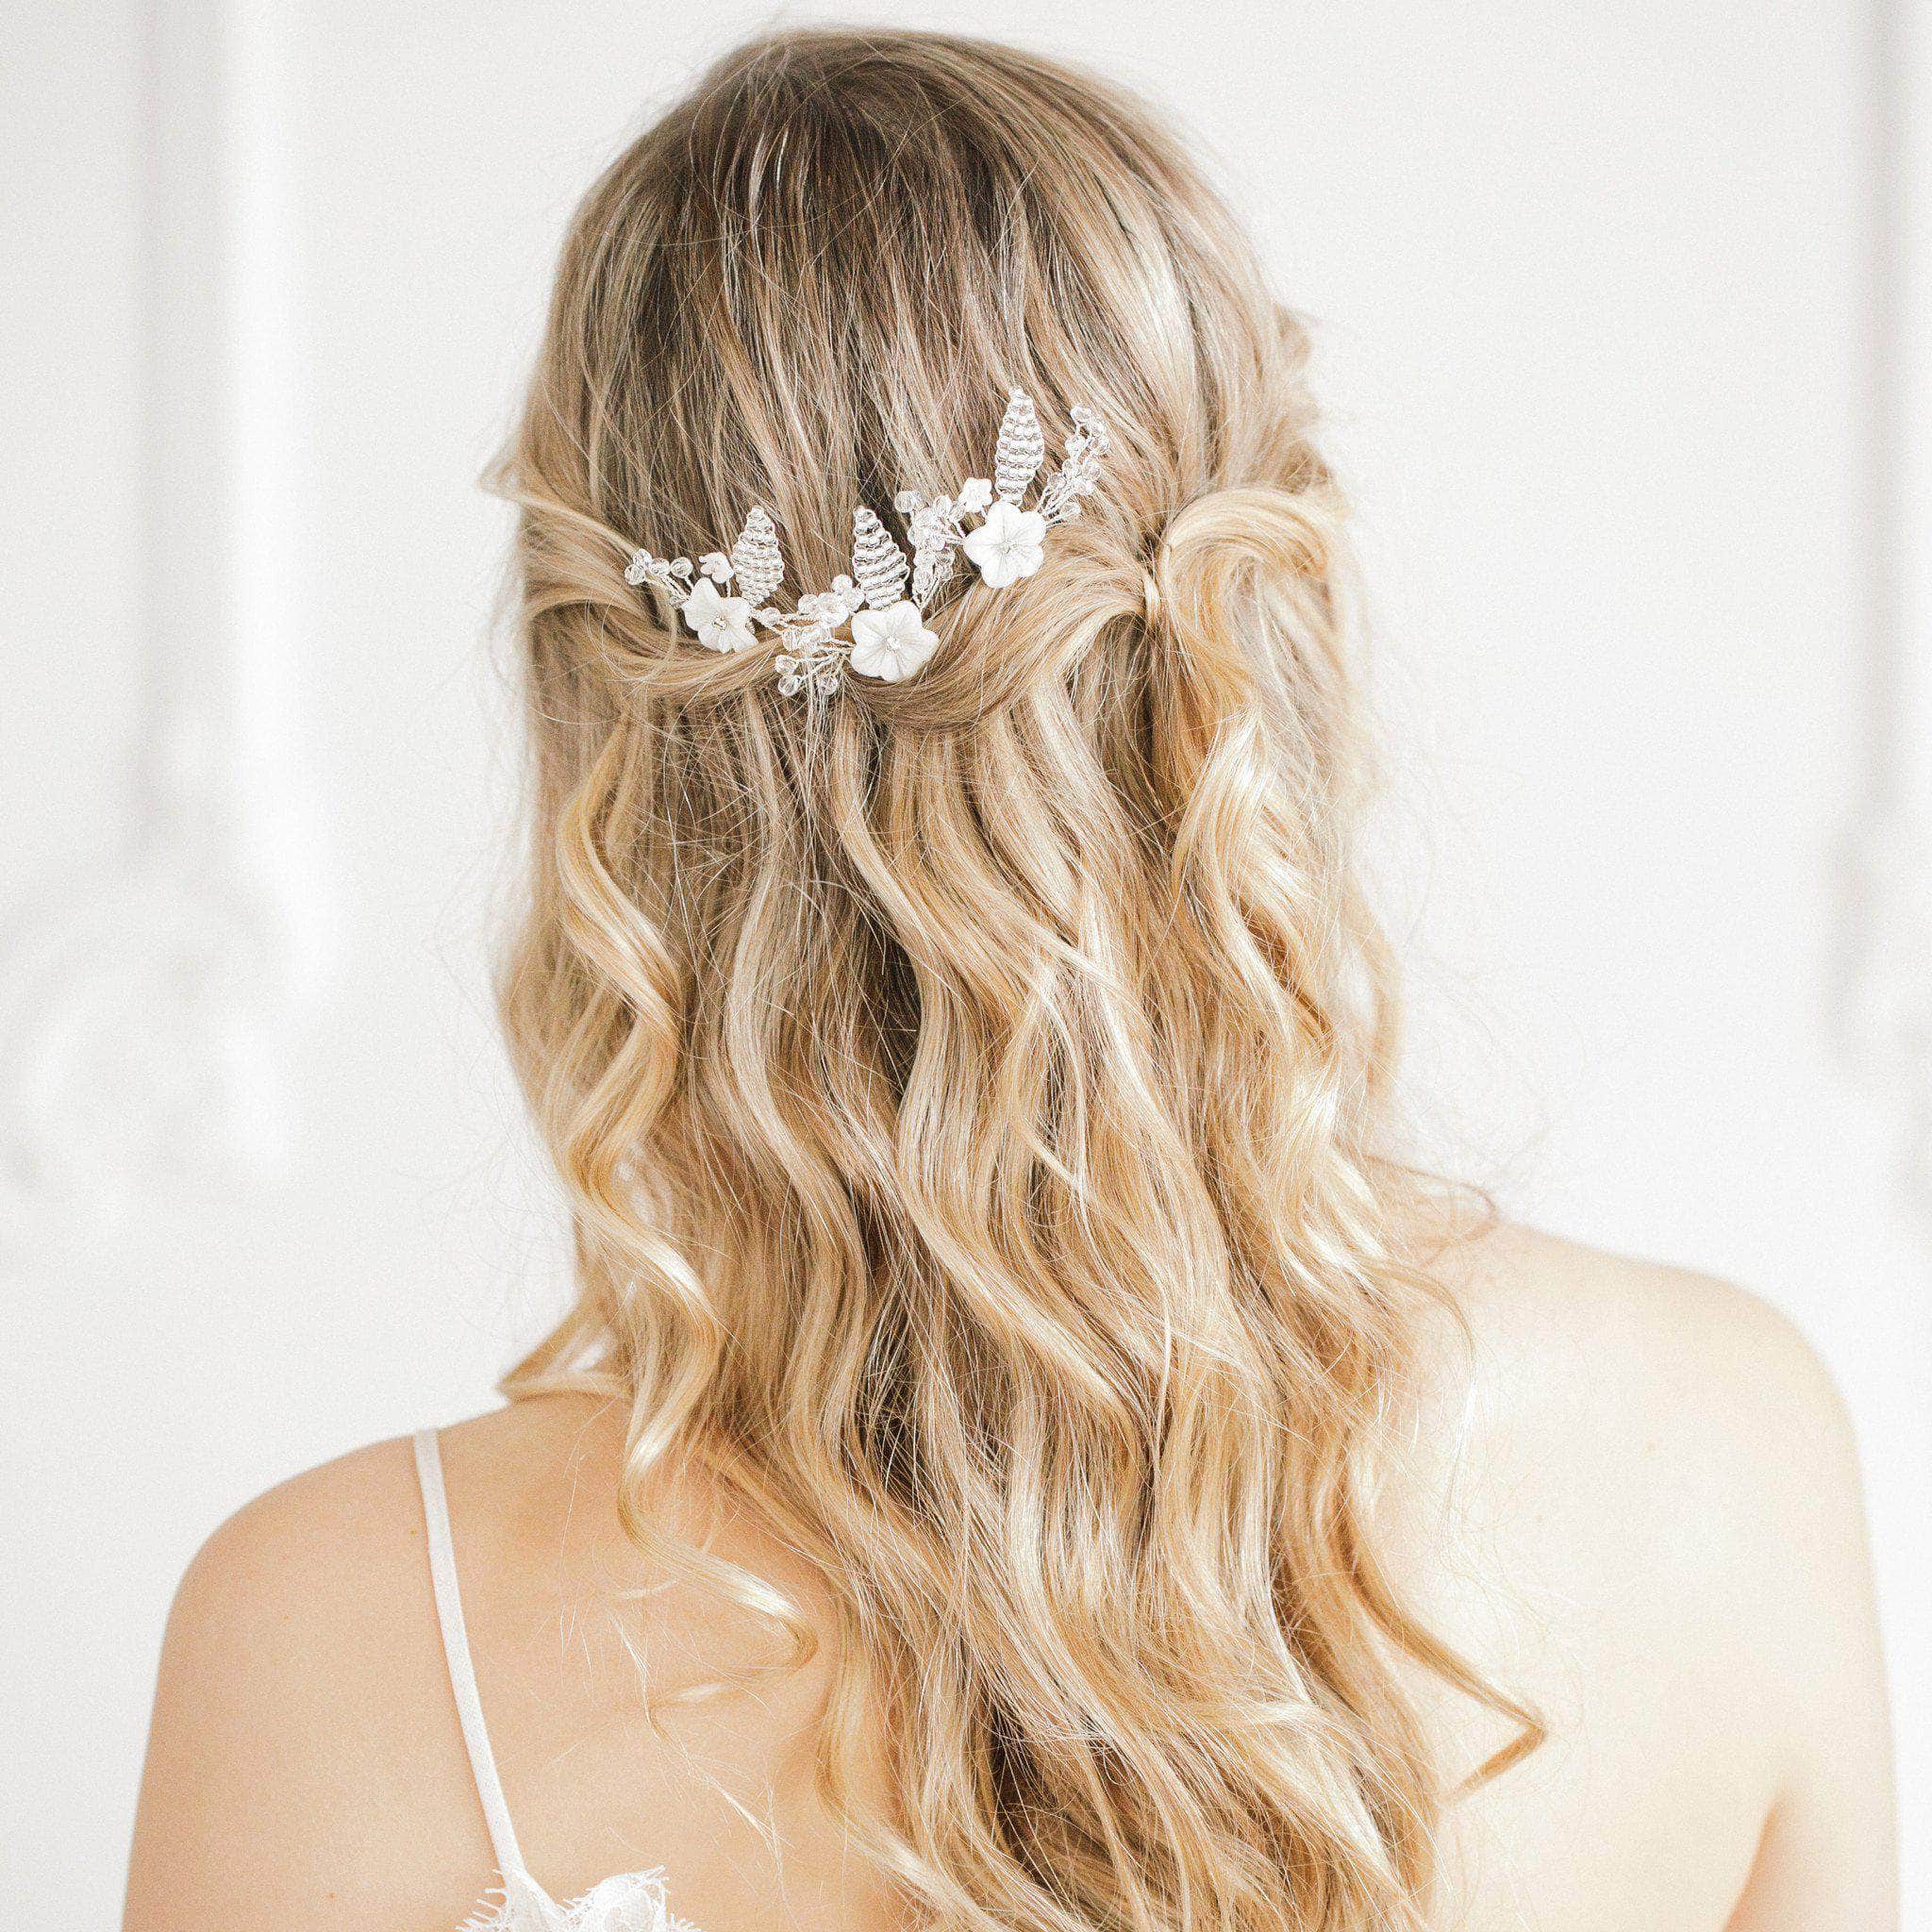 mother of pearl flower wedding hair pins (x3) - 'blossom'